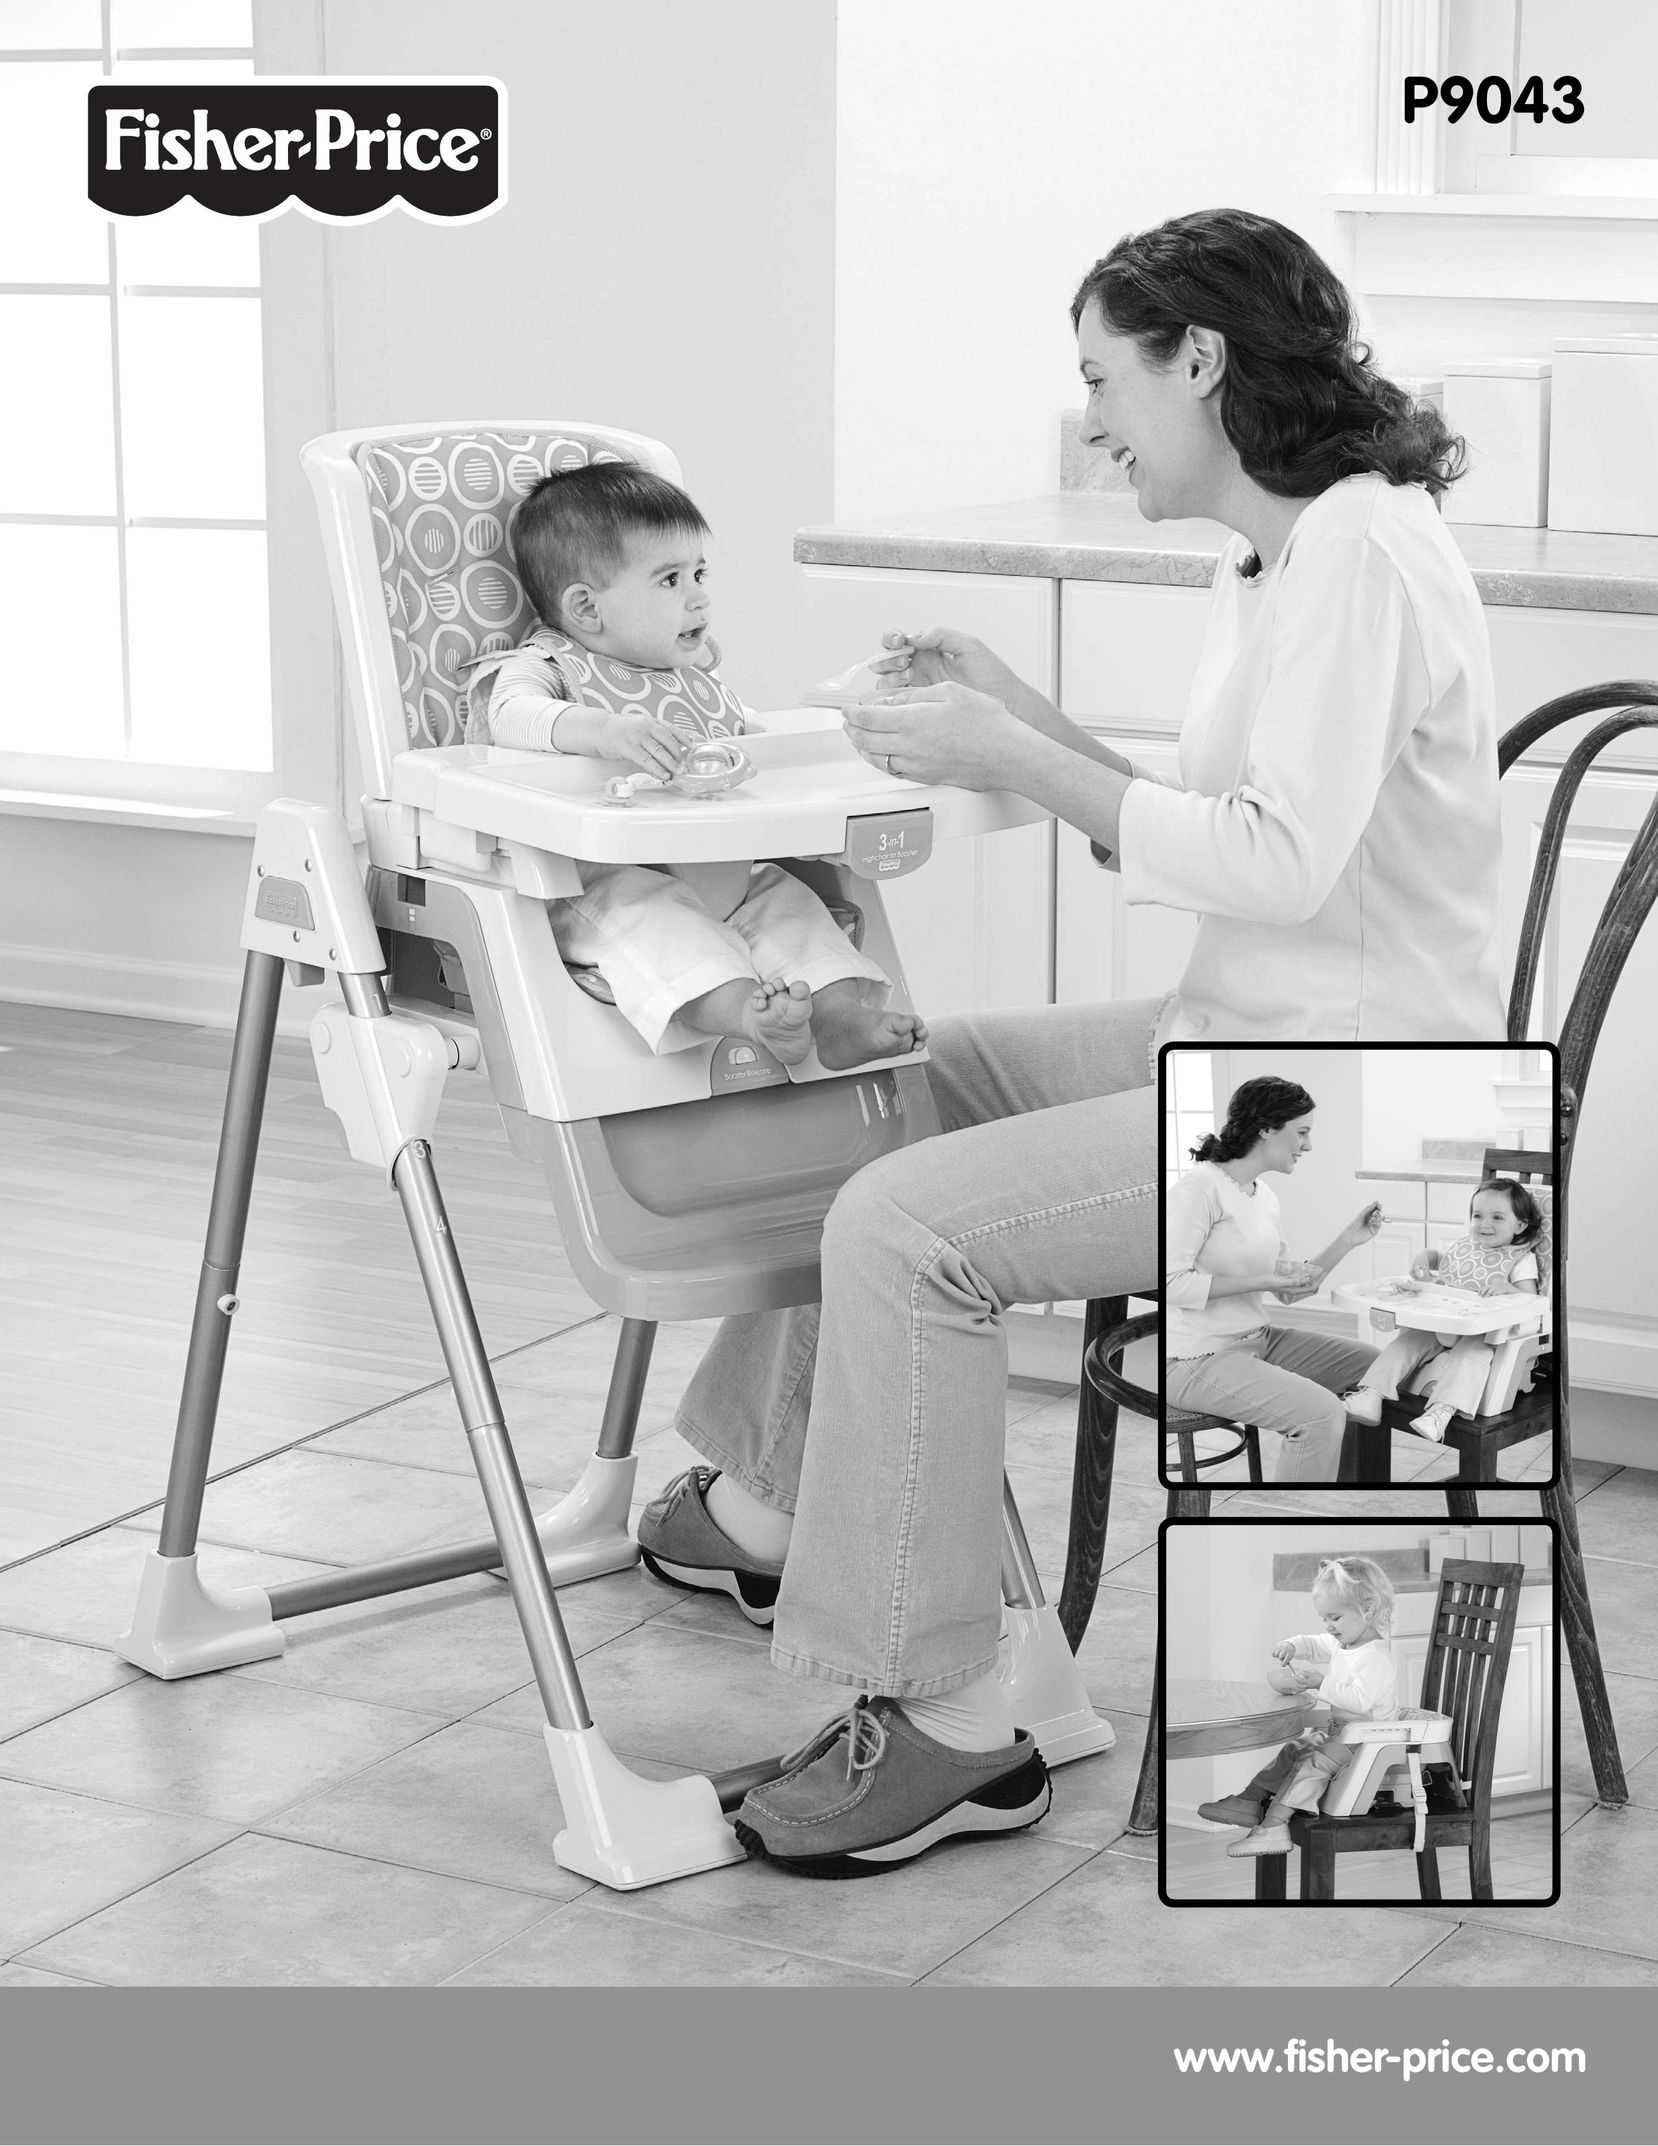 Fisher-Price P9043 High Chair User Manual